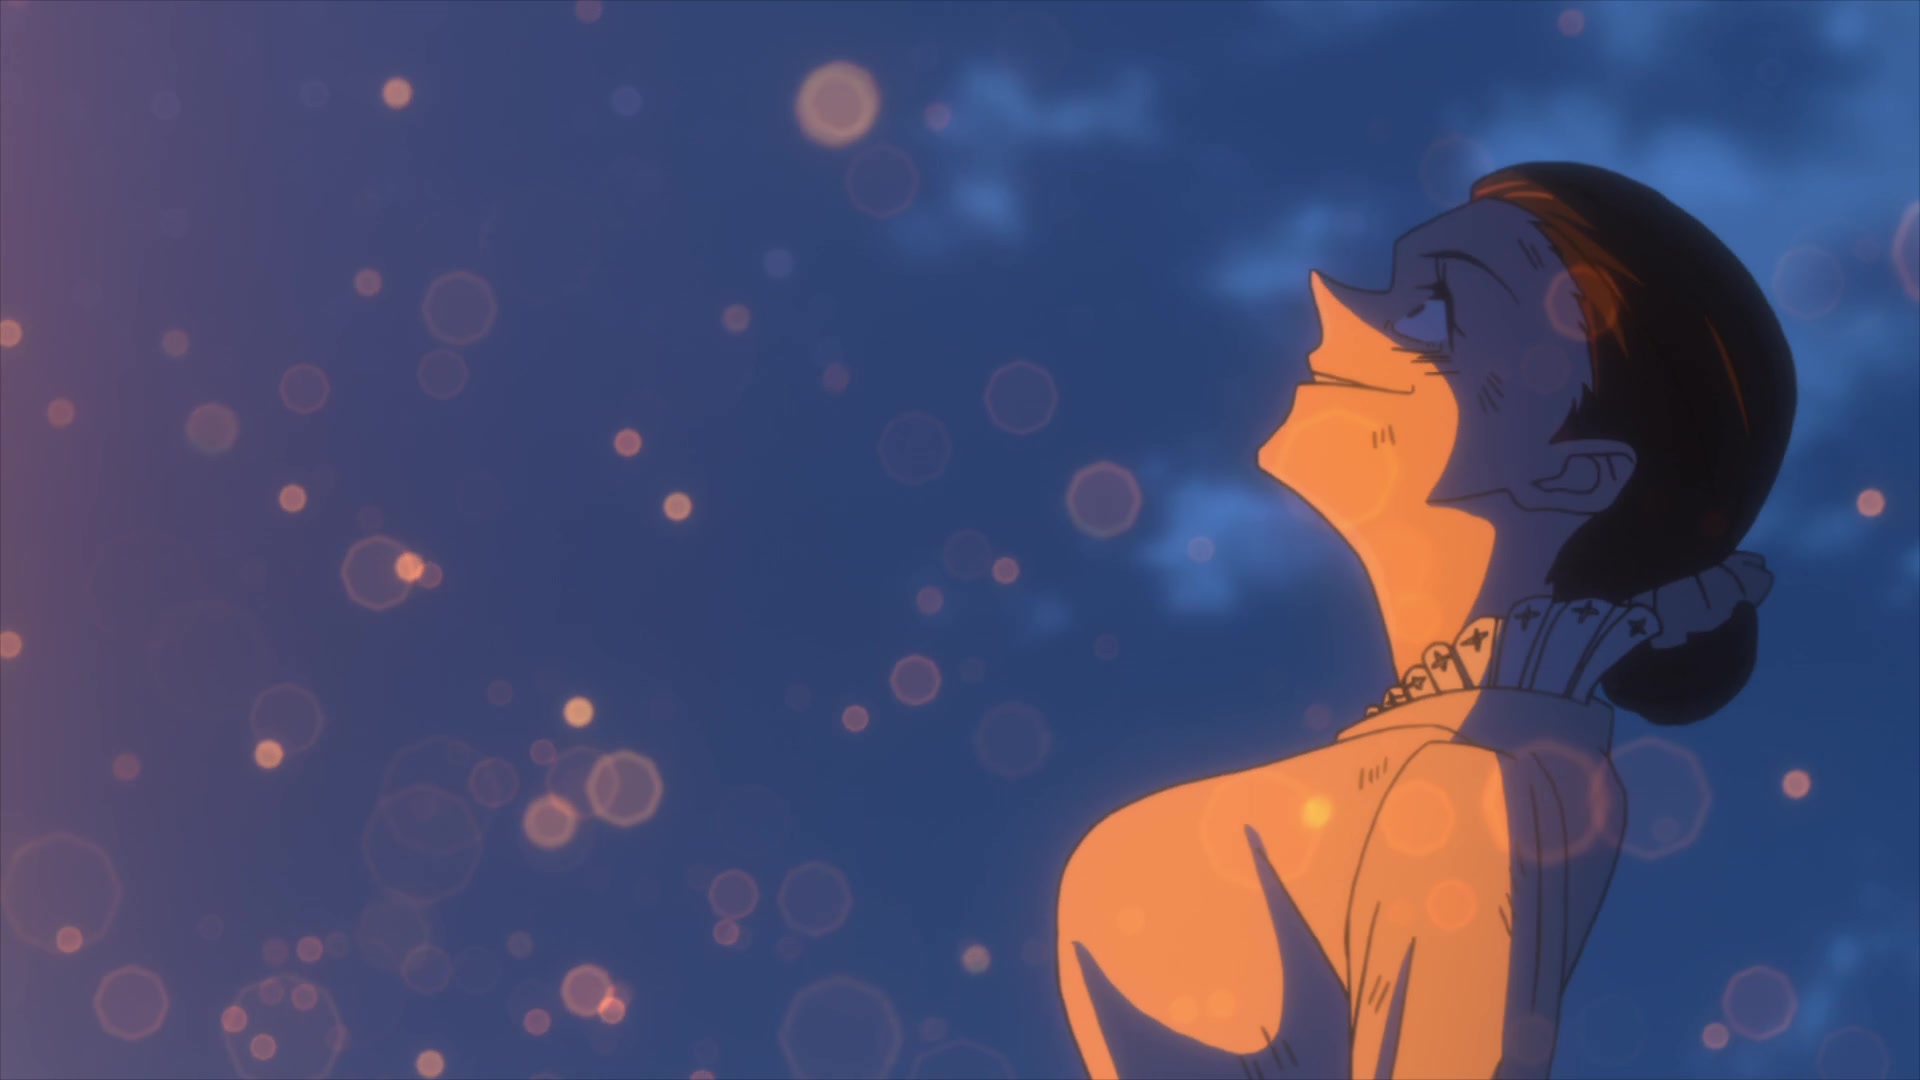 You cannot save the world on your own: The Promised Neverland episode 11 -  Bateszi Anime Blog